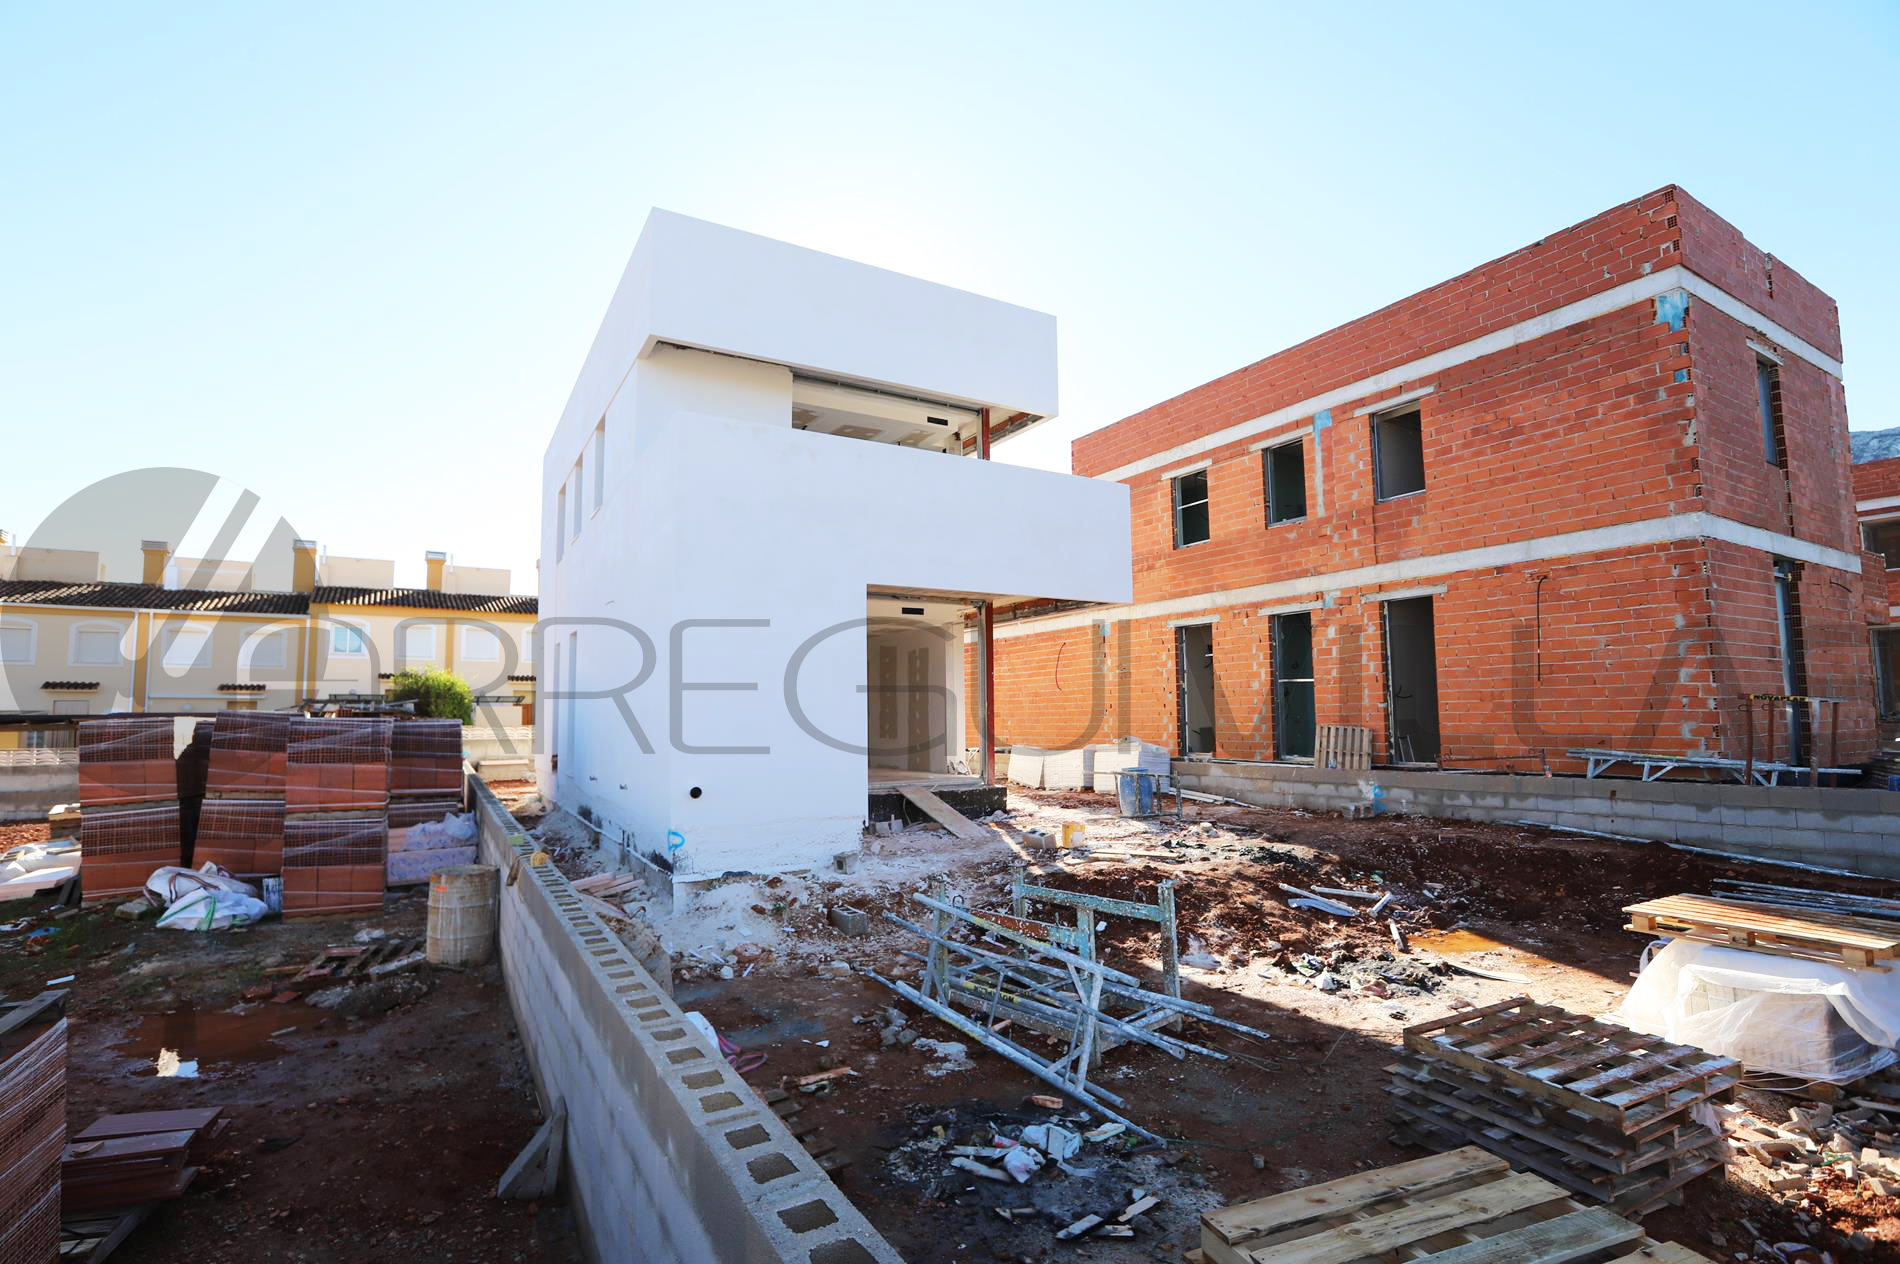 Newly built villas for sale in Dénia